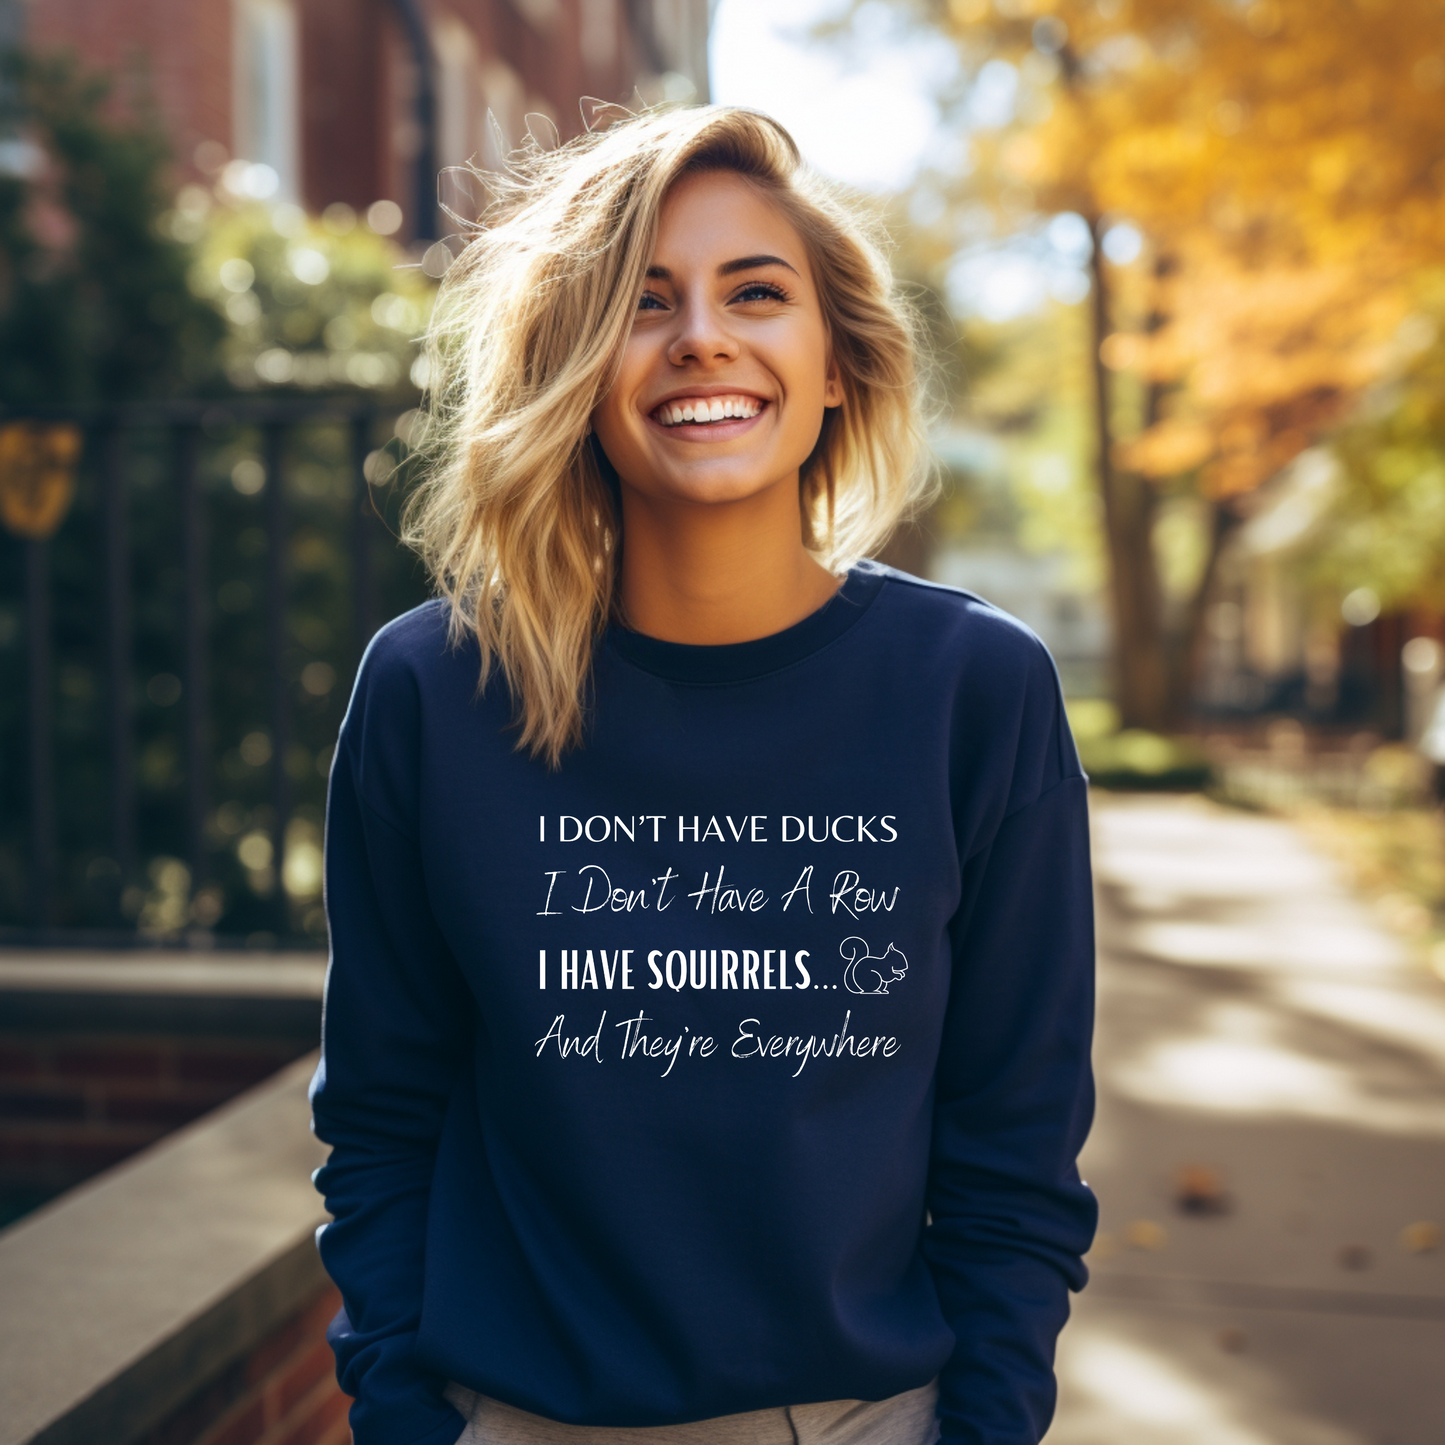 Cozy, Stylish, and Sarcastic Sweatshirt - I Have Squirrels And They’re Everywhere